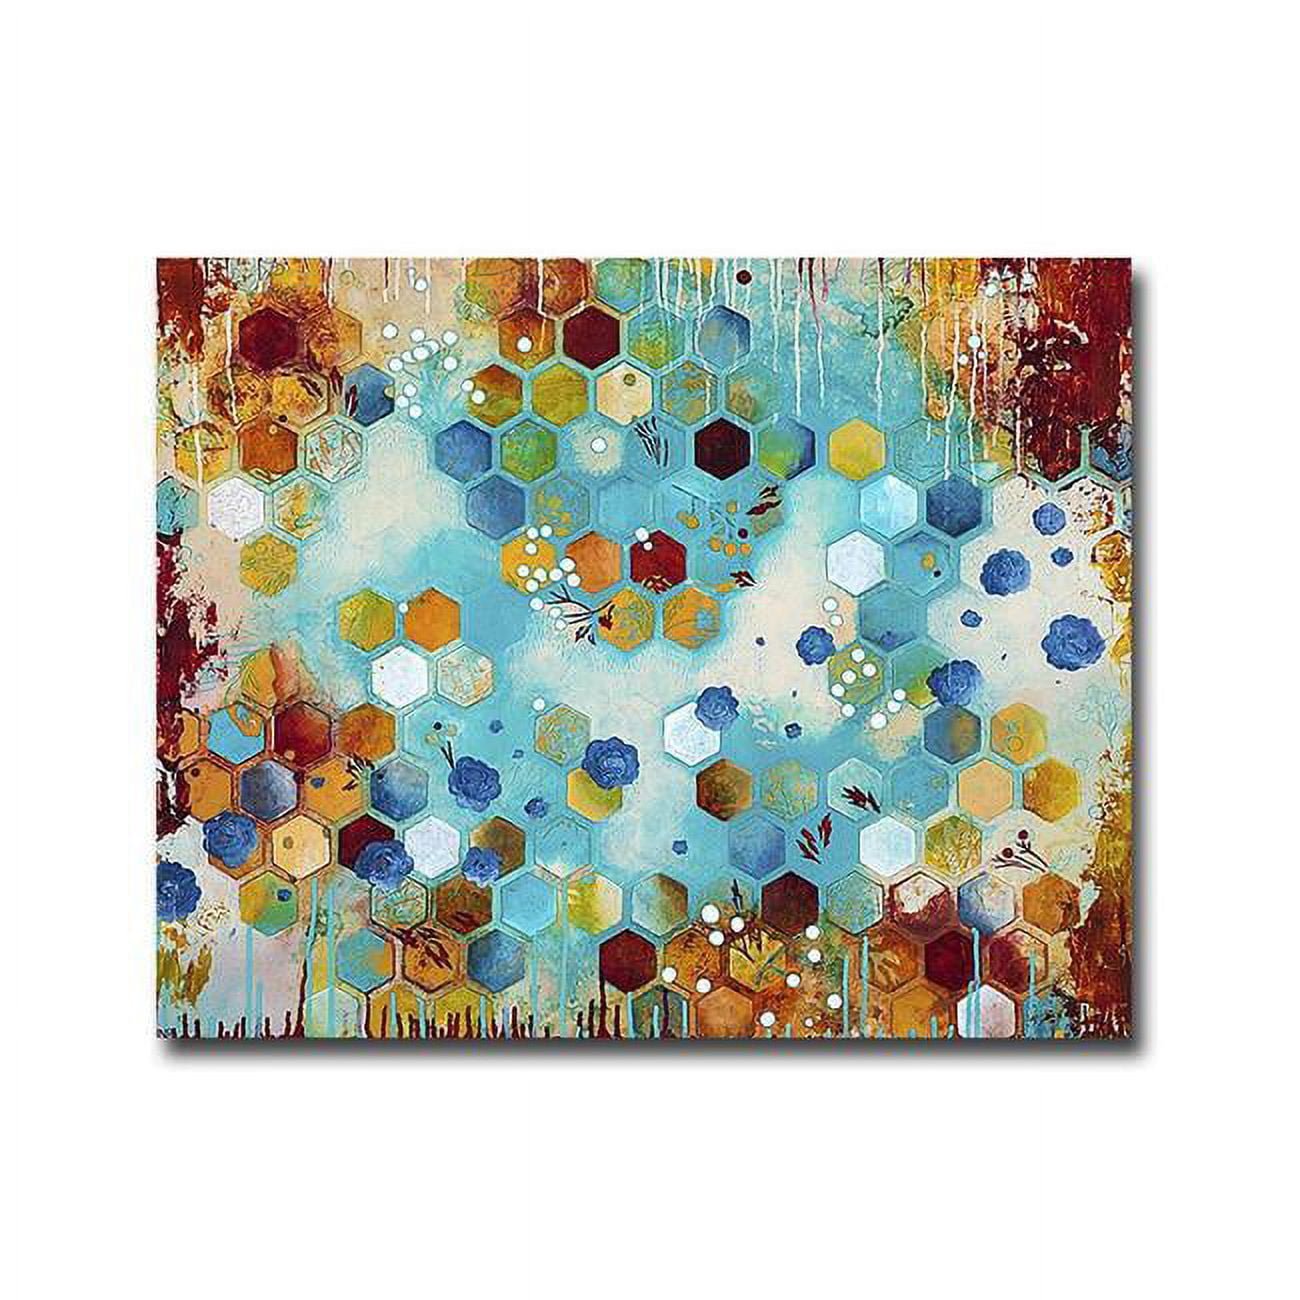 3240n954ig Scattered By Heather Noel Robinson Premium Oversize Gallery-wrapped Canvas Giclee Art - 32 X 40 X 1.5 In.